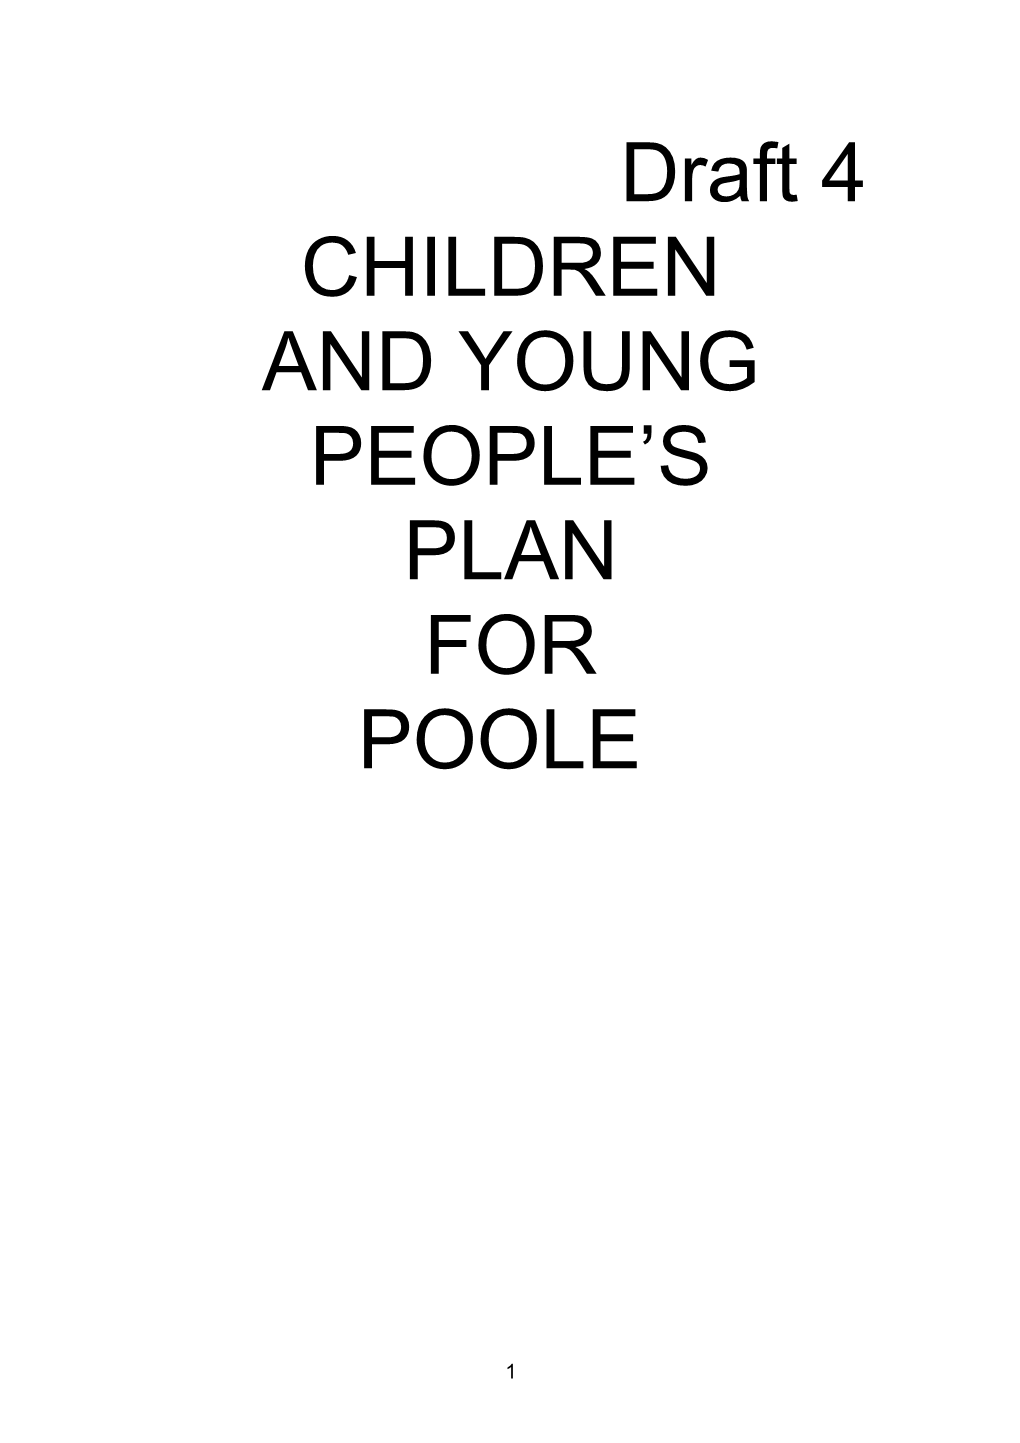 Appendix to Children and Young People's Plan